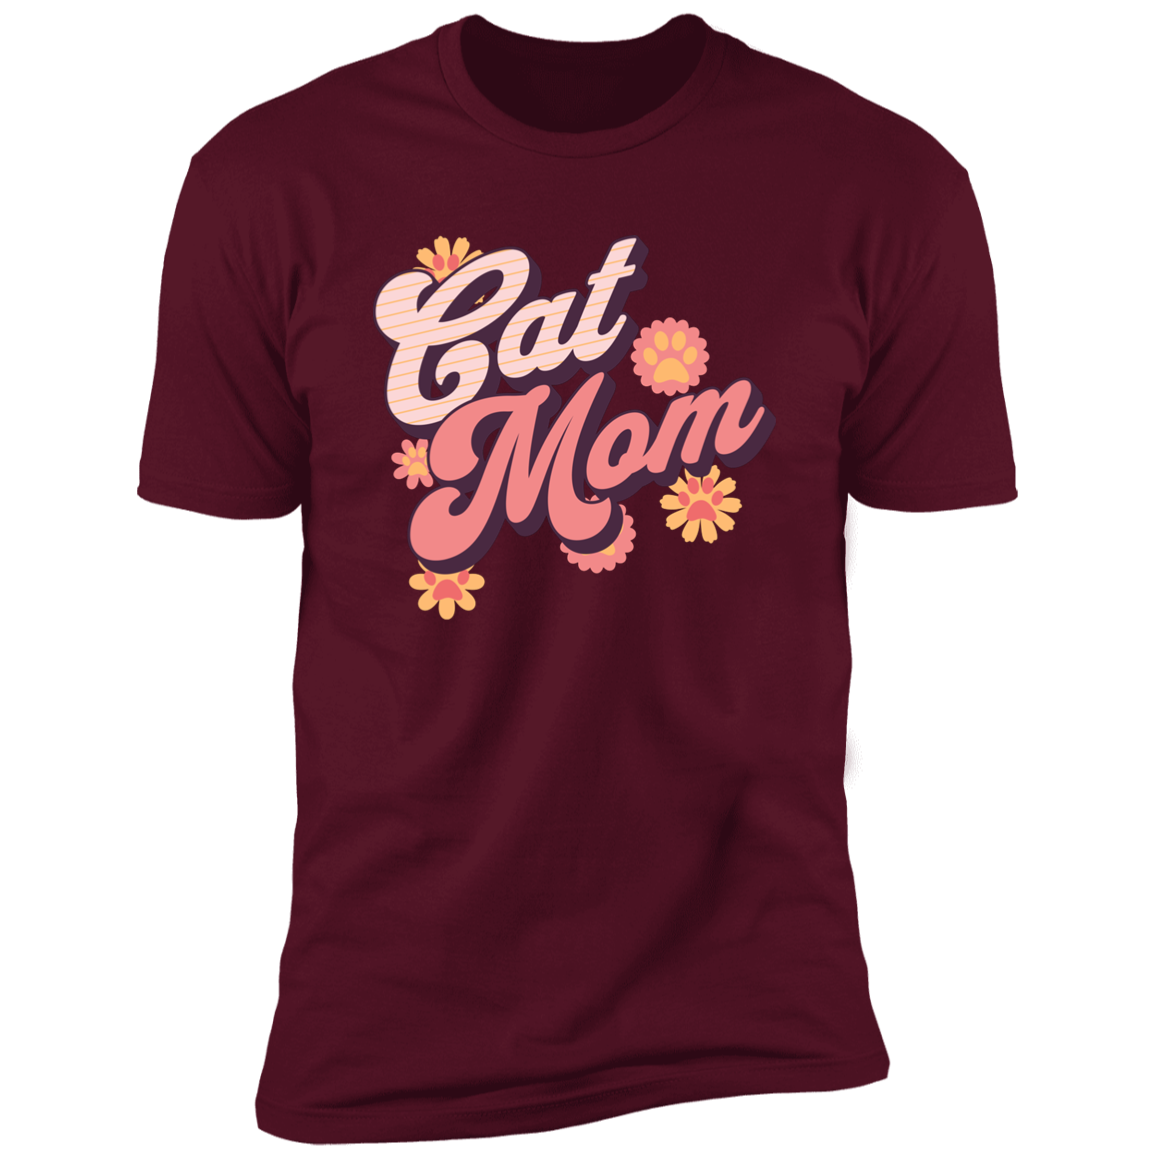 Cat Mom Retro T-shirt, Cat Mom Shirt for humans, in maroon